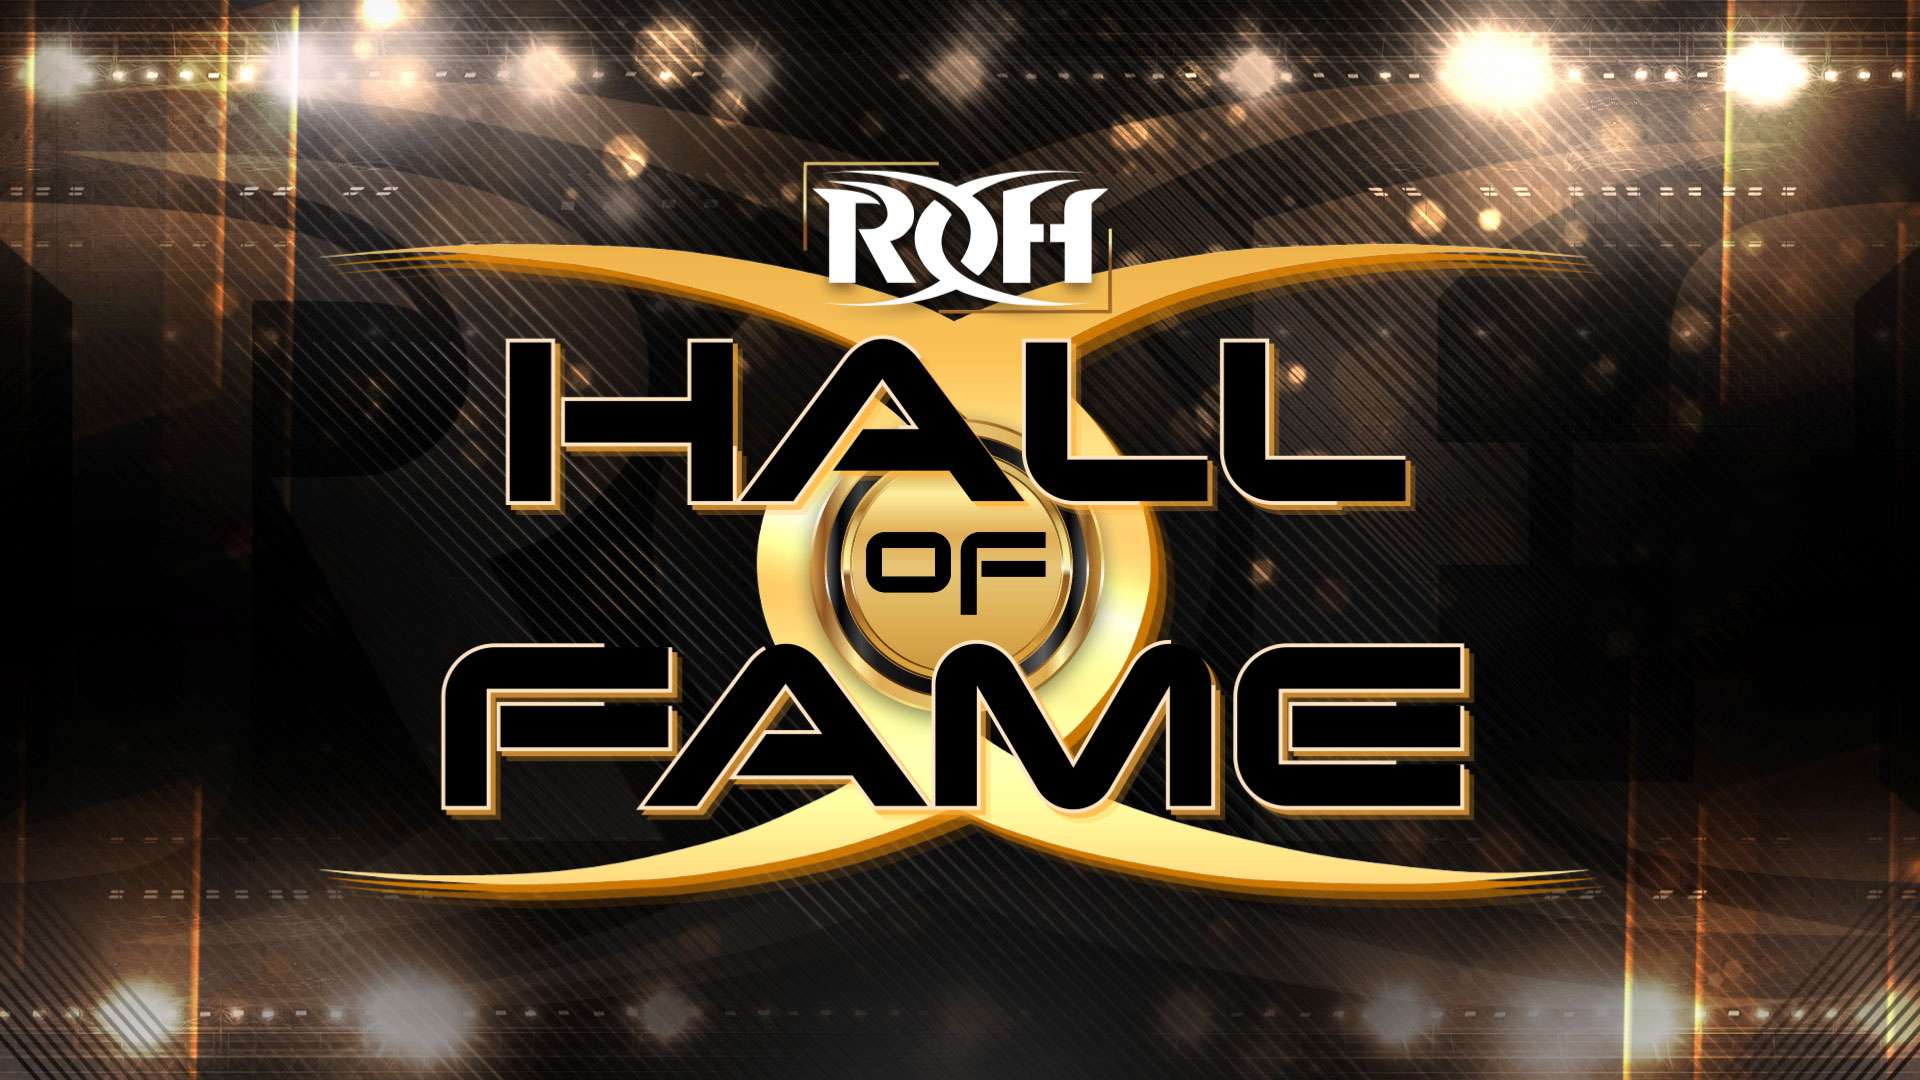 Every wrestler in the Ring of Honor Hall of Fame